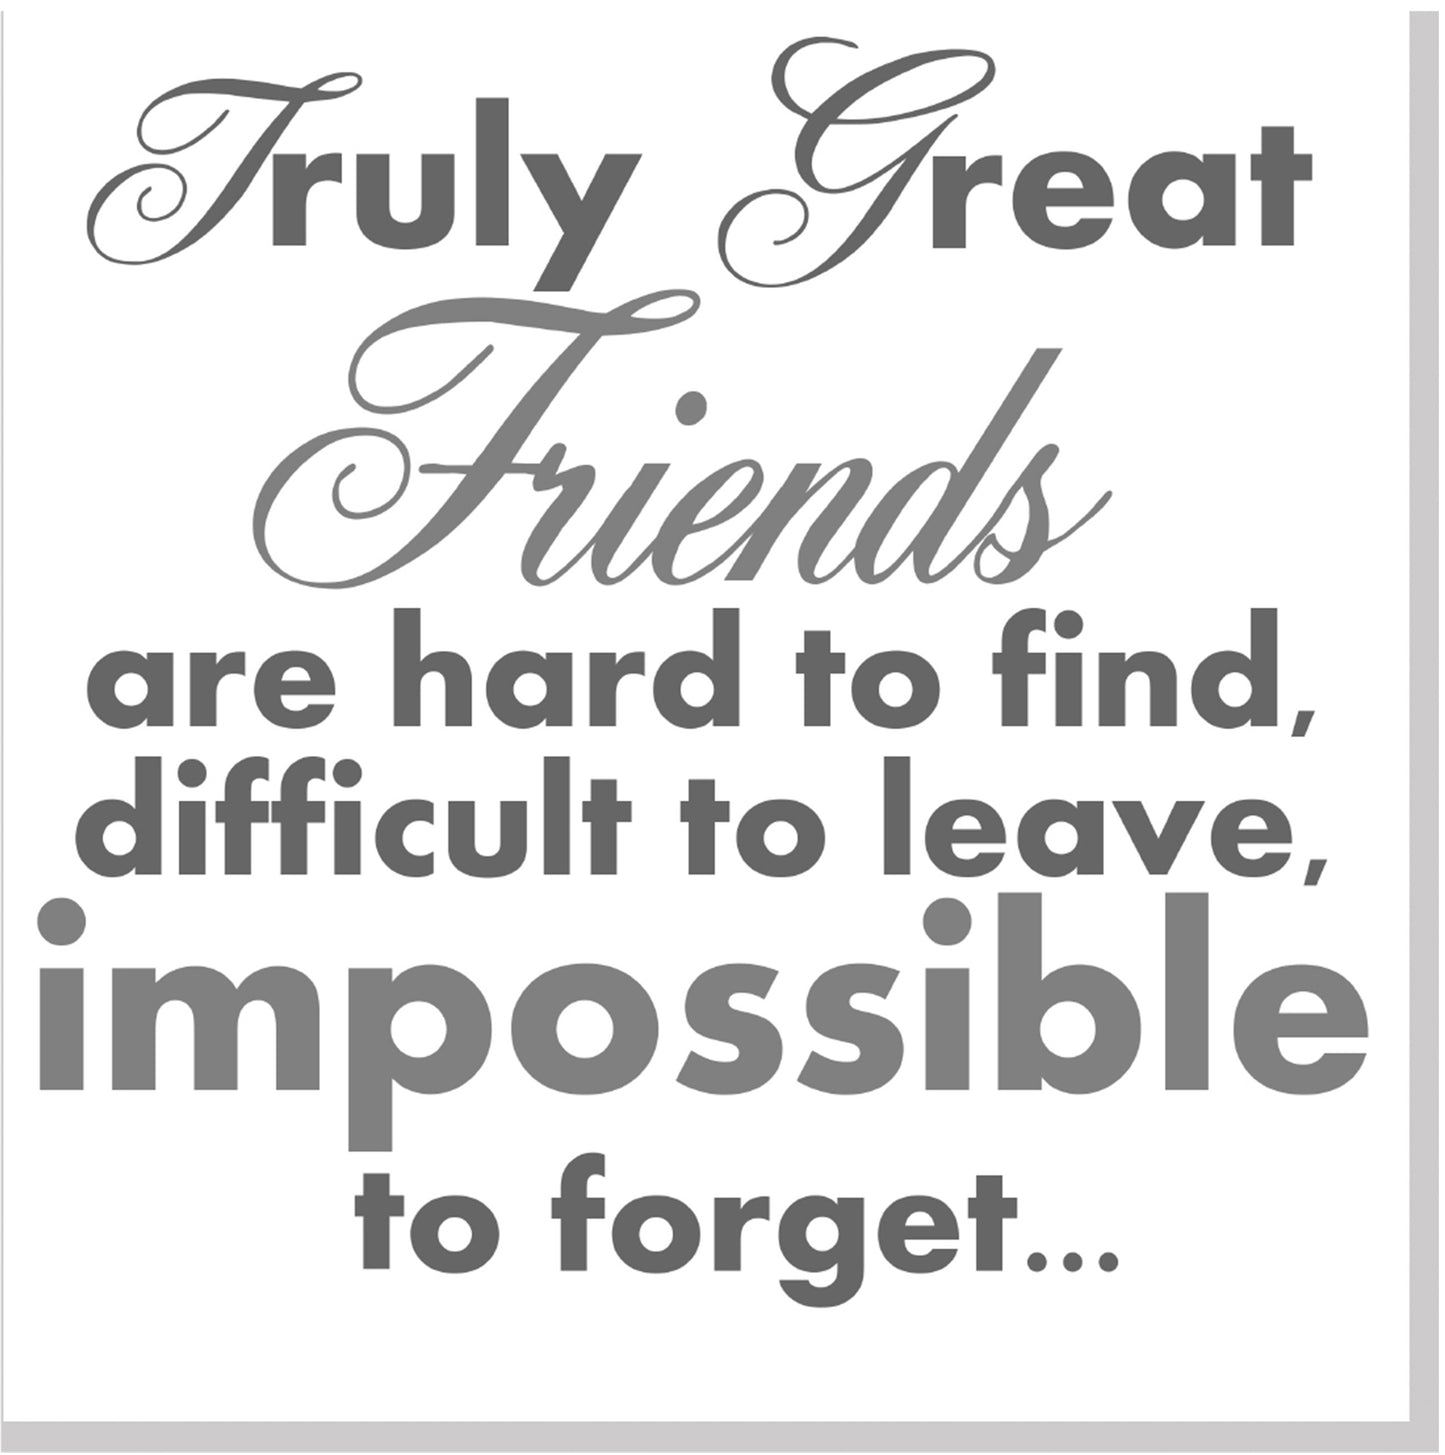 Truly great friends square card